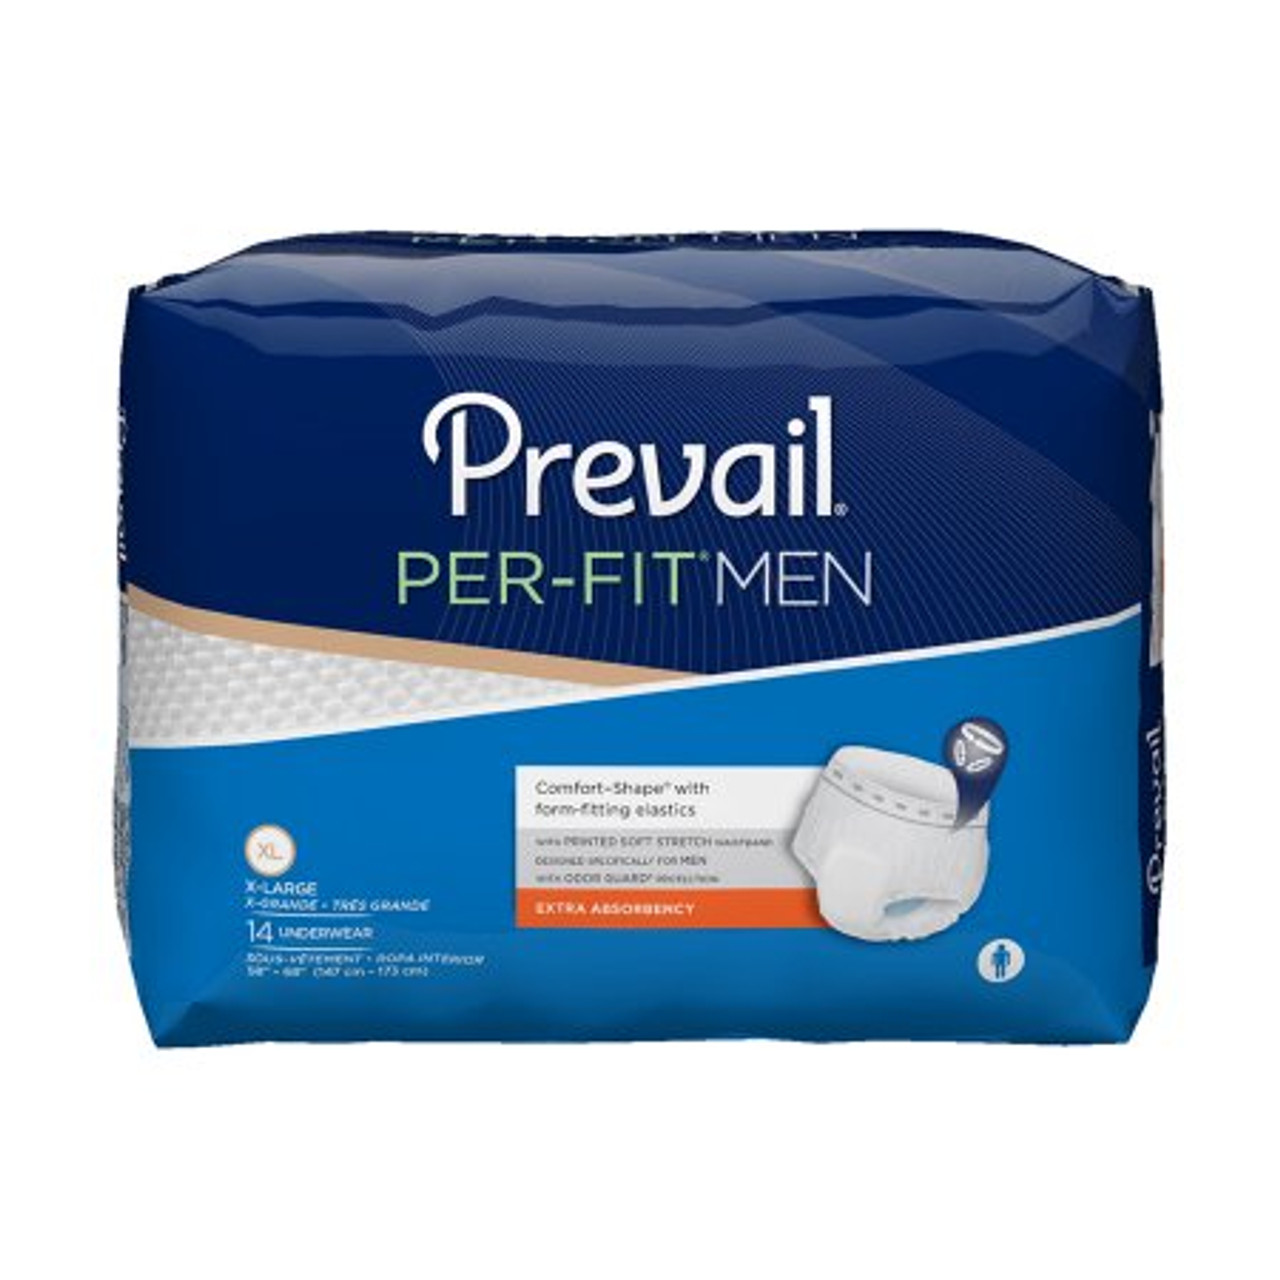 Prevail Per-Fit Incontinence Underwear, Extra Absorbency - Unisex Adult,  Size XL